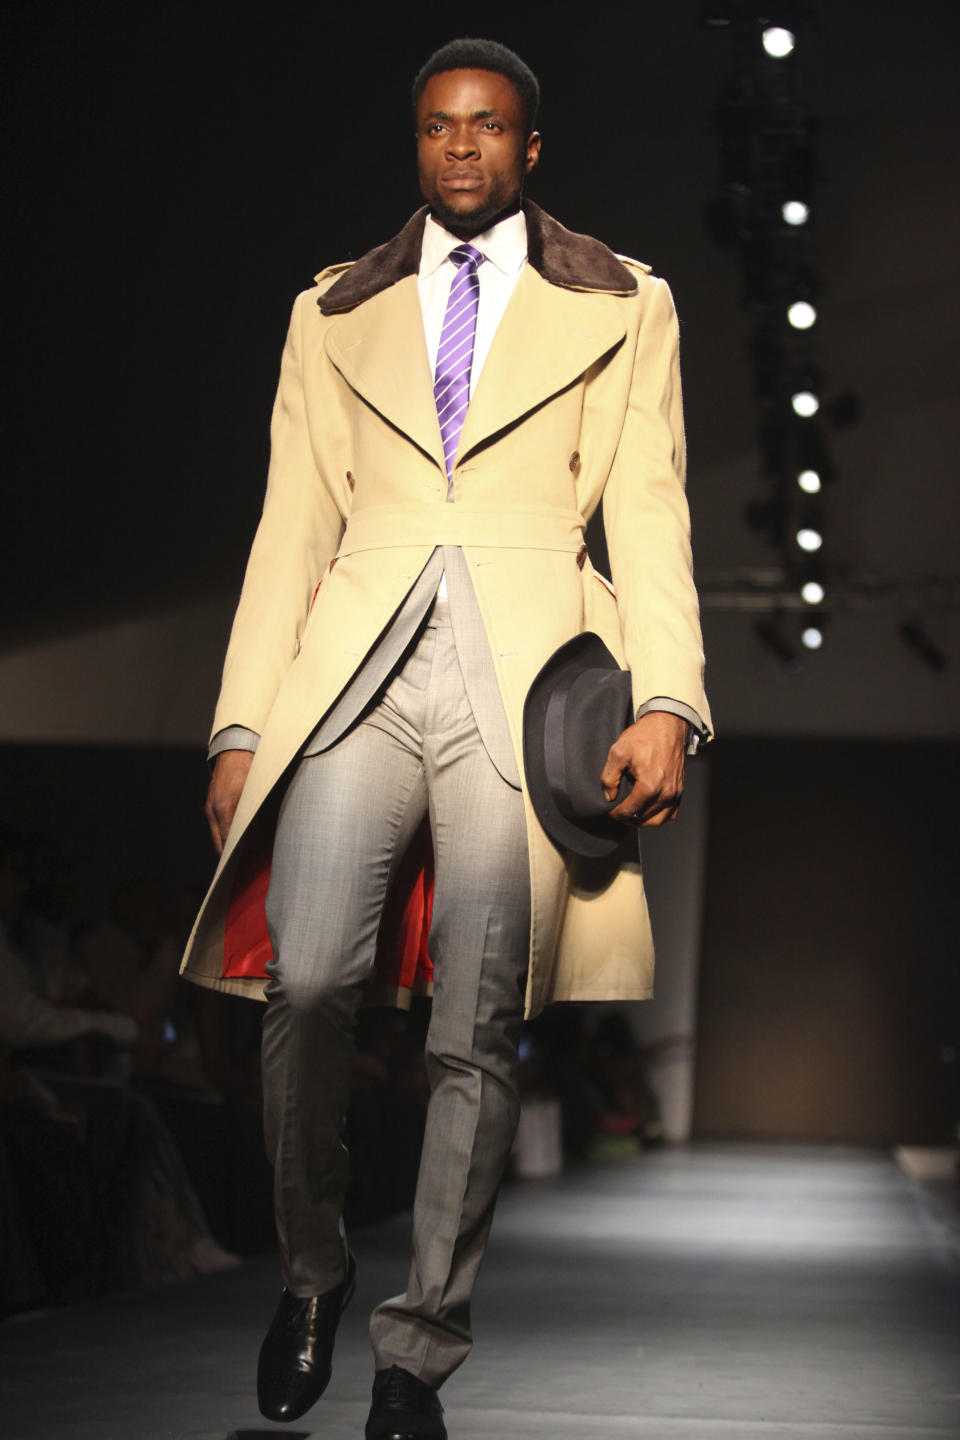 A model displays an outfit during the ARISE Fashion Week event in Lagos, Nigeria on Sunday, March 11, 2012. (AP Photos/Sunday Alamba)